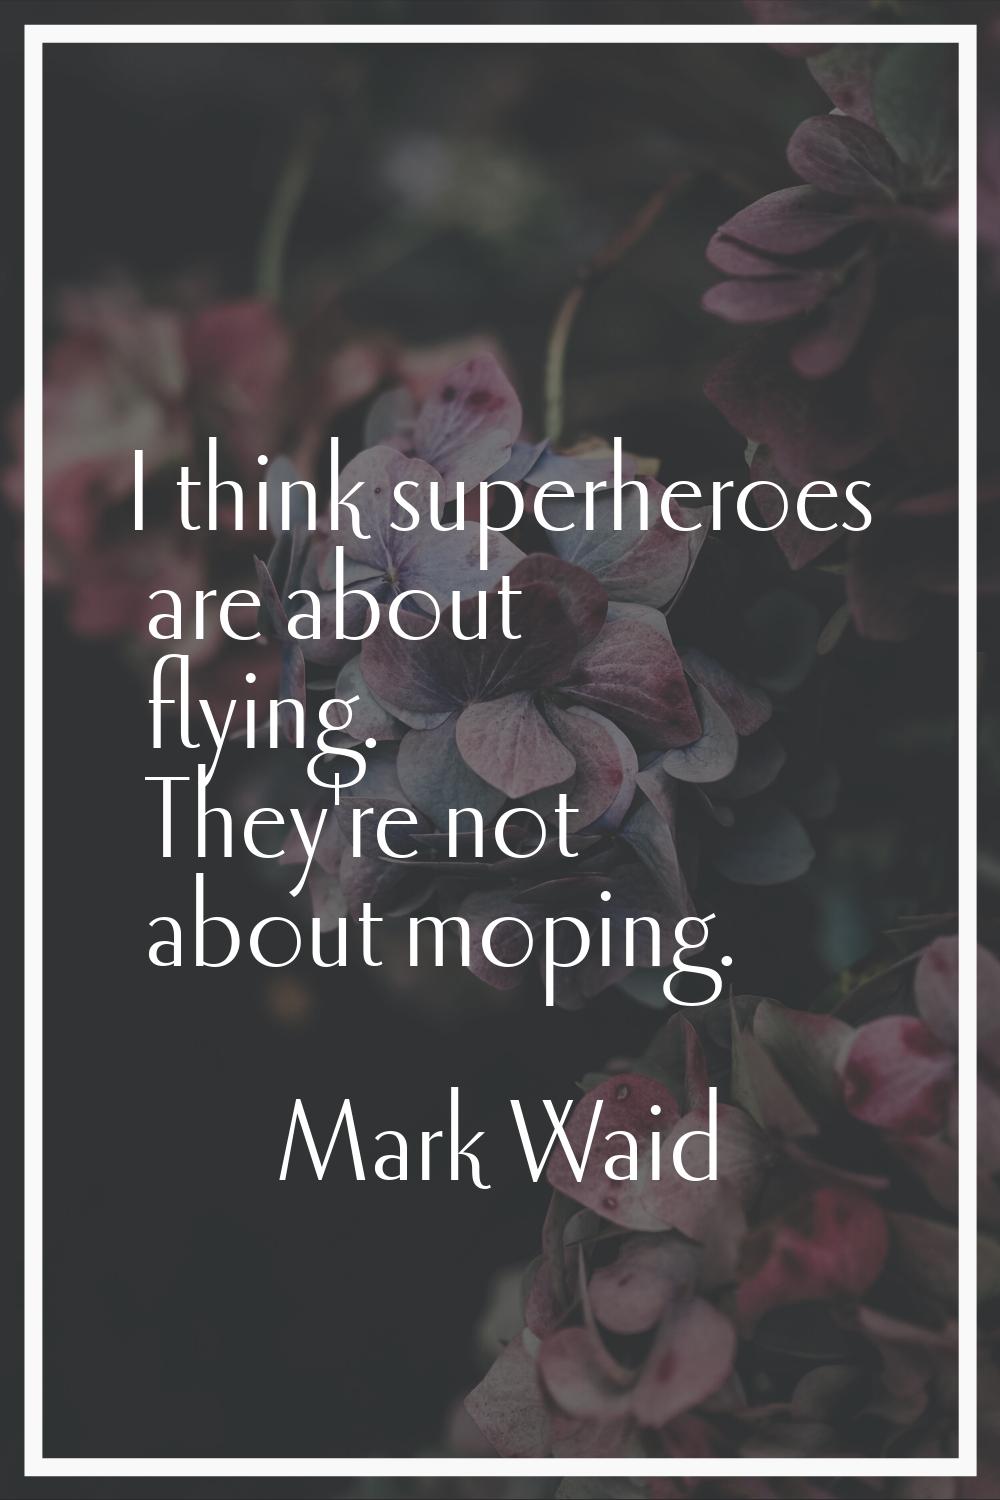 I think superheroes are about flying. They're not about moping.